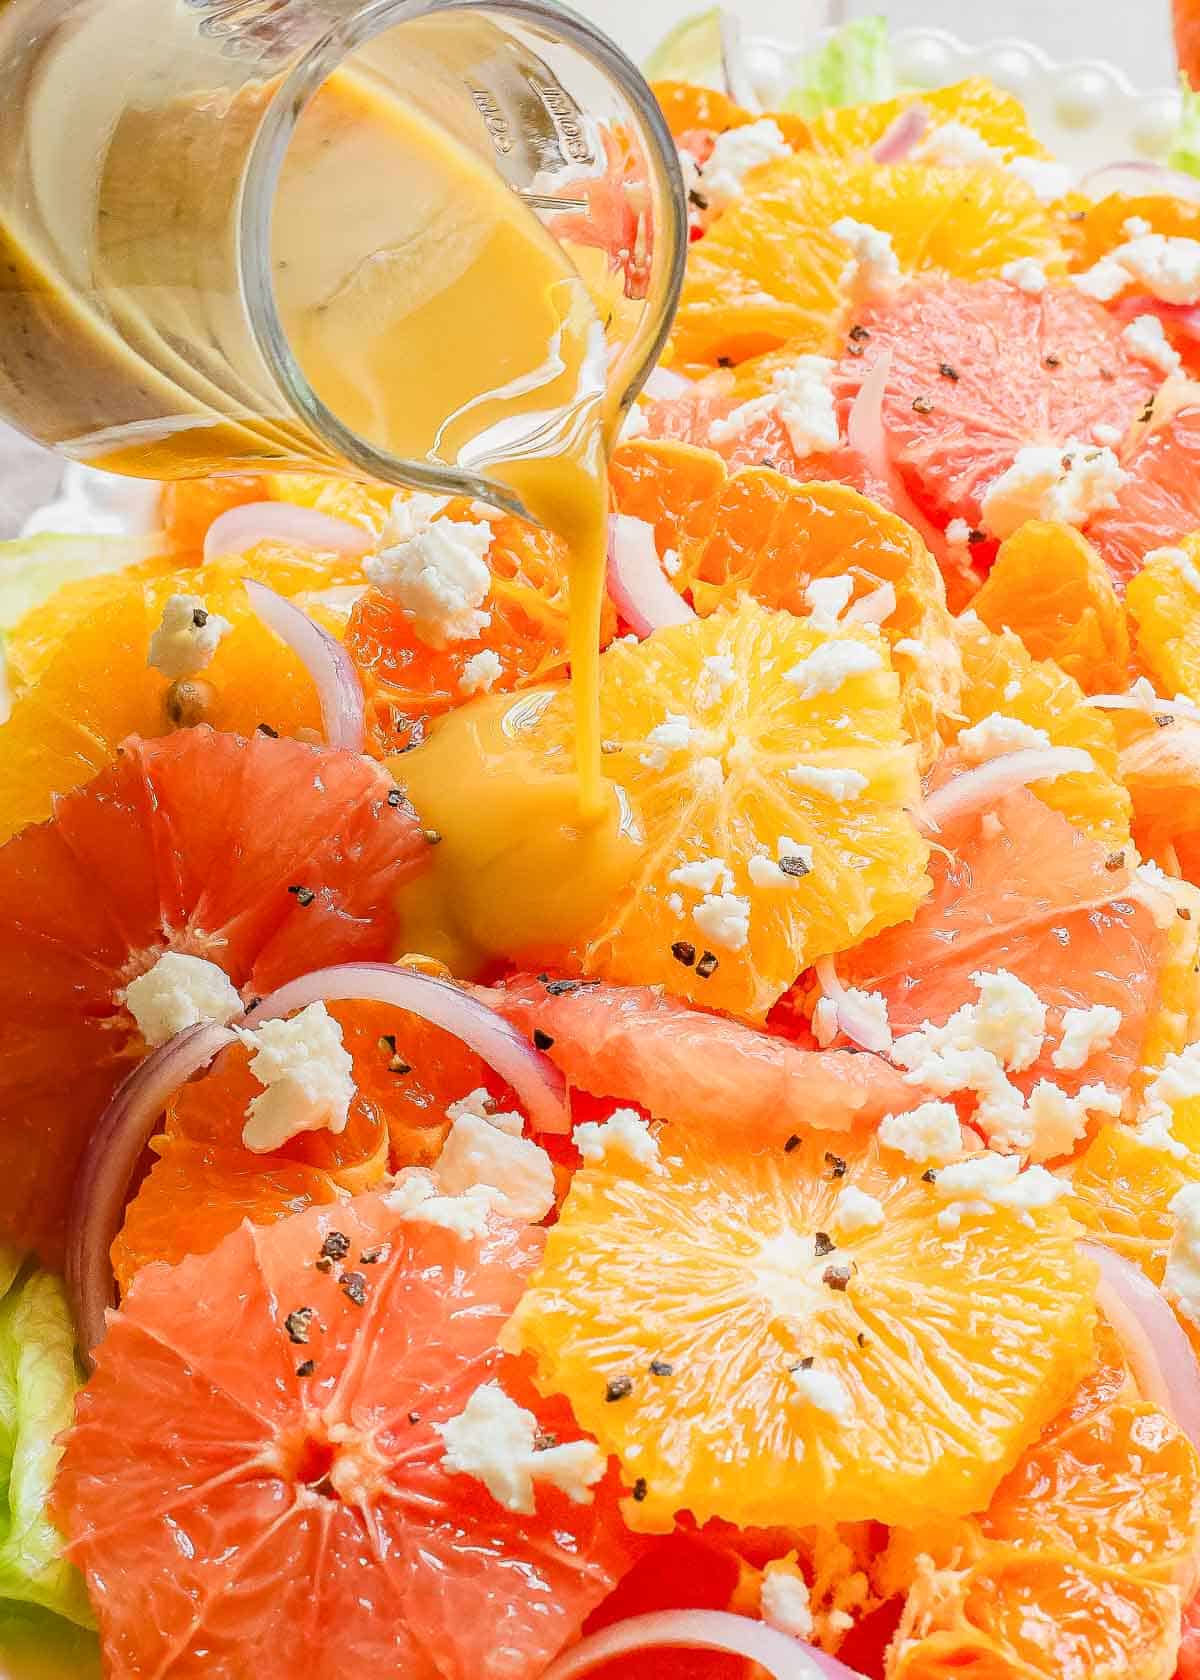 A plate of oranges and grapefruits over salad with a dressing being poured on it.